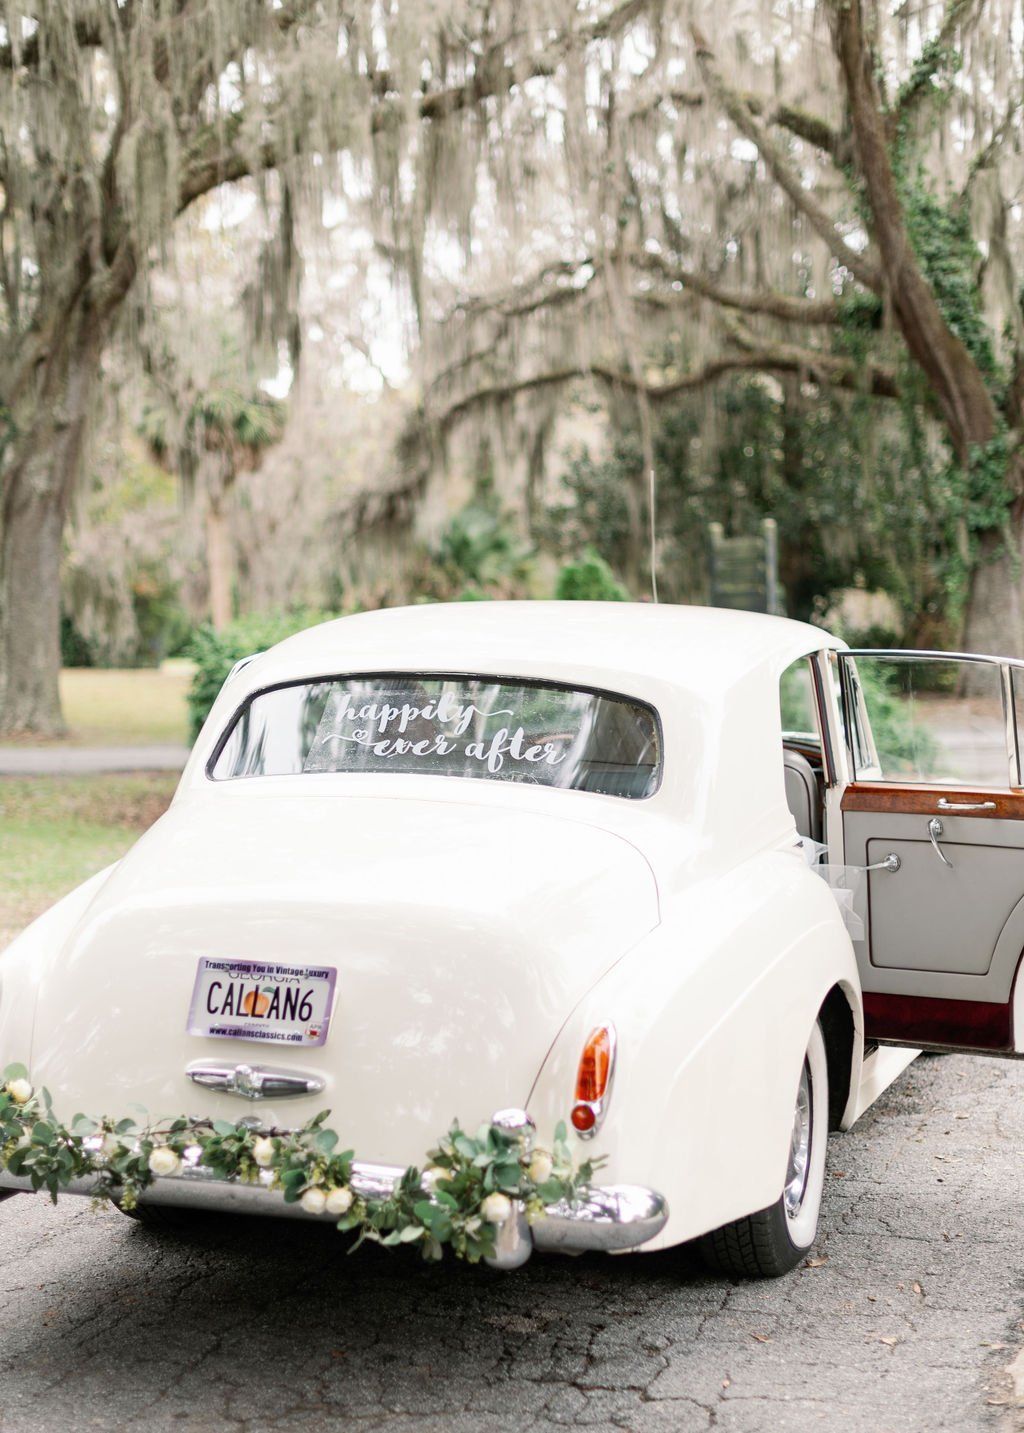 Rachel-and-matthews-elegant-savannah-wedding-at-whitefield-chapel-and-vics-on-the-river-featuring-ivory-and-beau-florals-planned-by-savannah-wedding-planner-ivory-and-beau-savannah-florist-savannah-wedding-florist-savannah-wedding-3.jpg